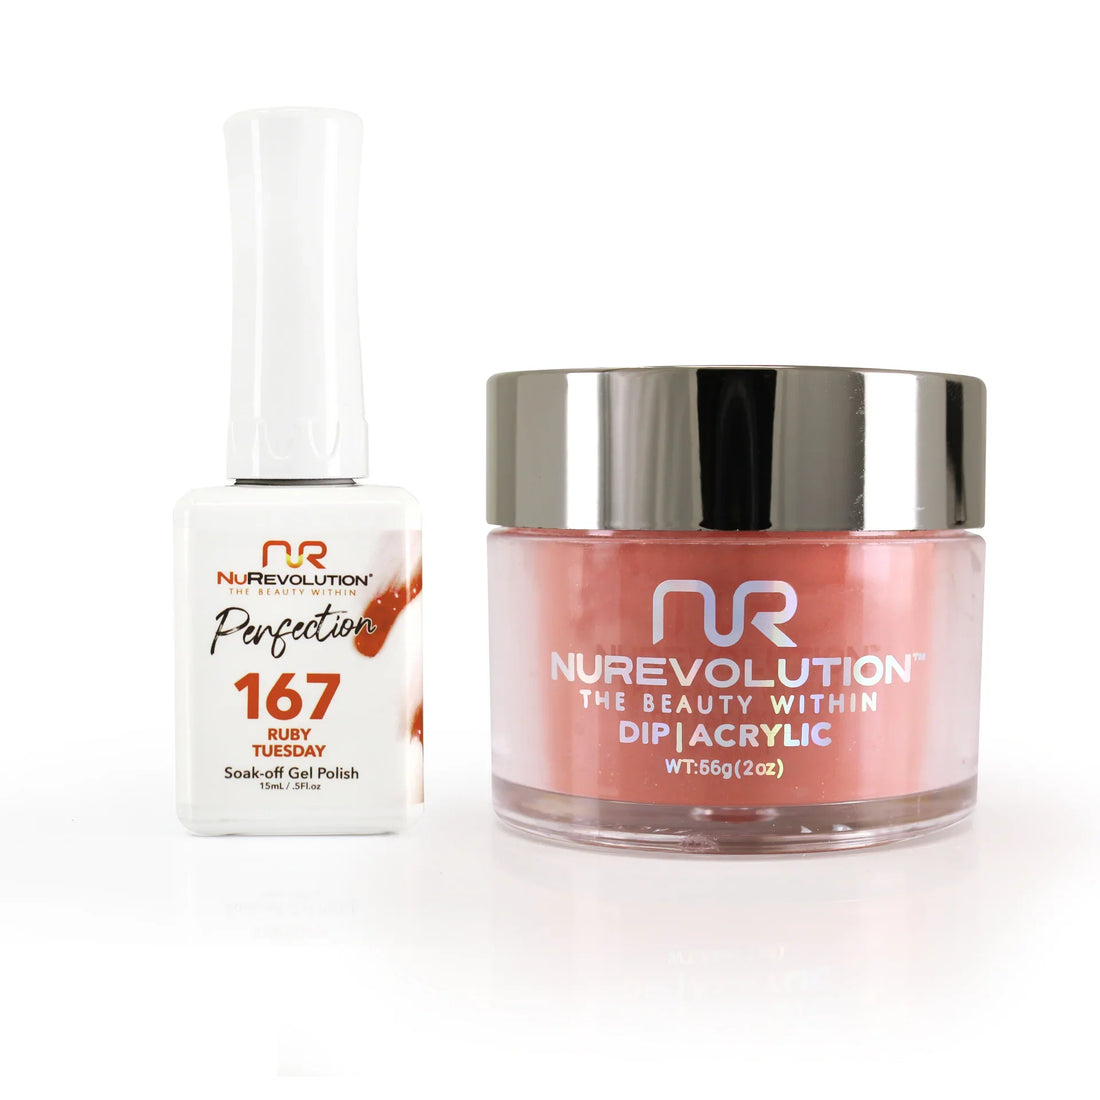 NuRevolution Perfection 167 Ruby Tuesday